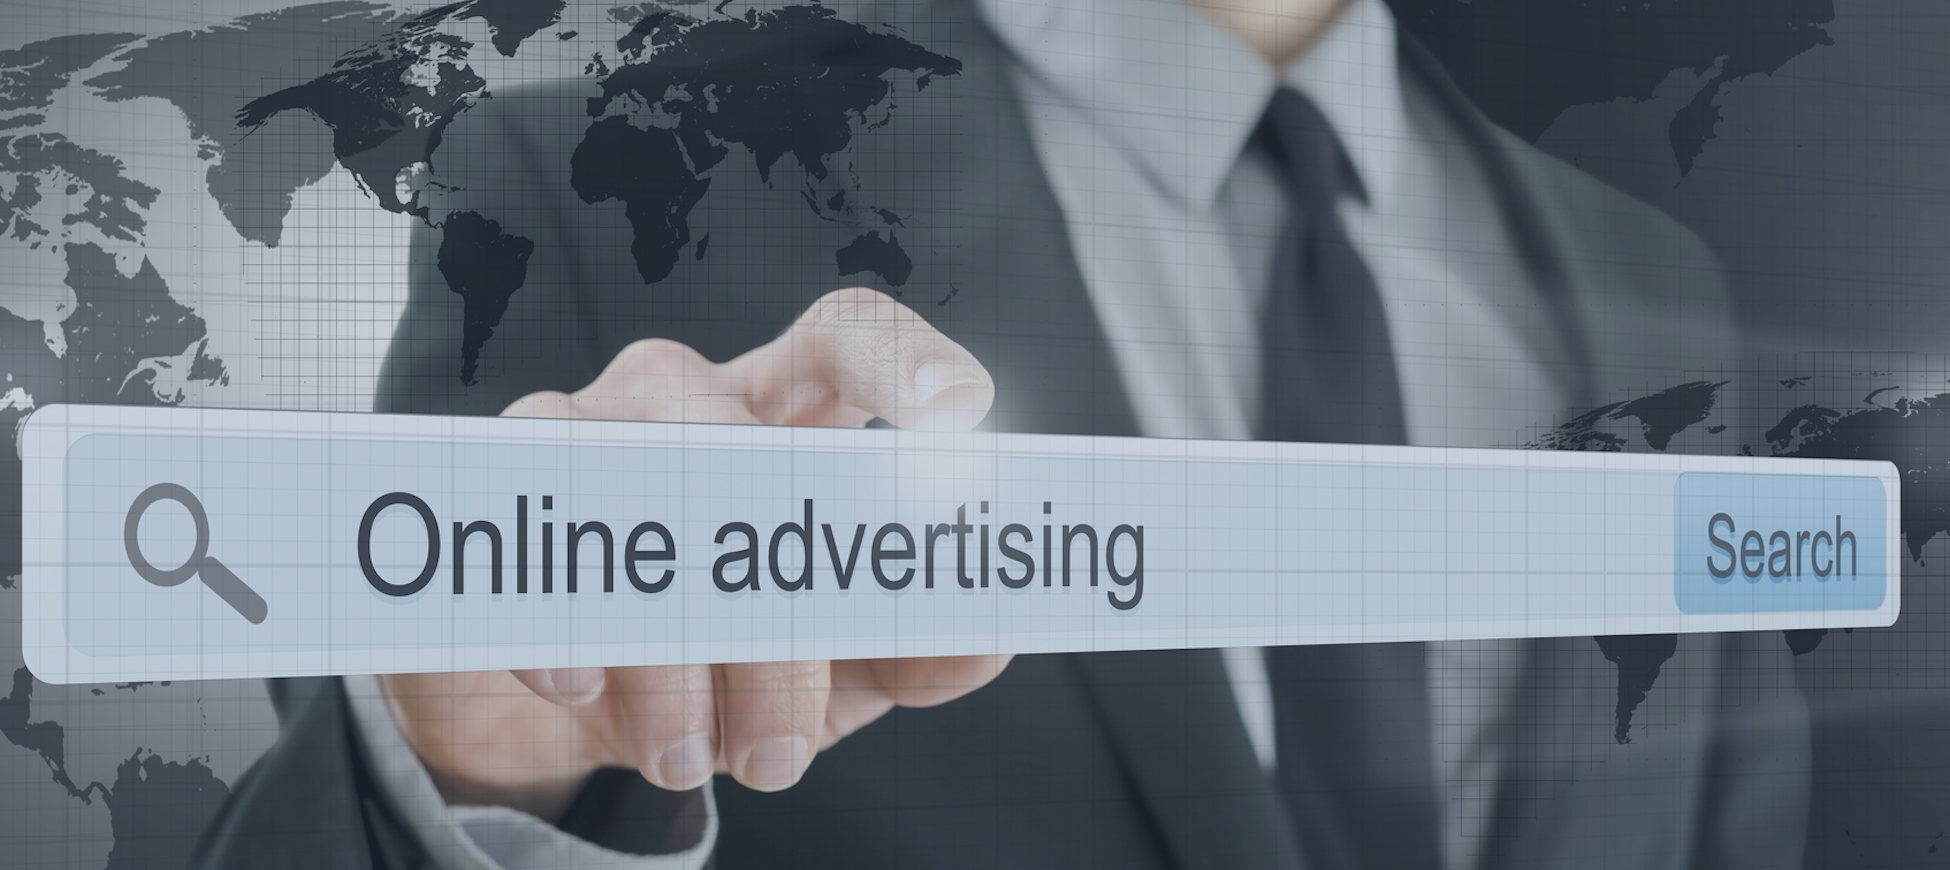 Advertise your products and services online at Bing, Facebook, and Google using Internet Advertising.